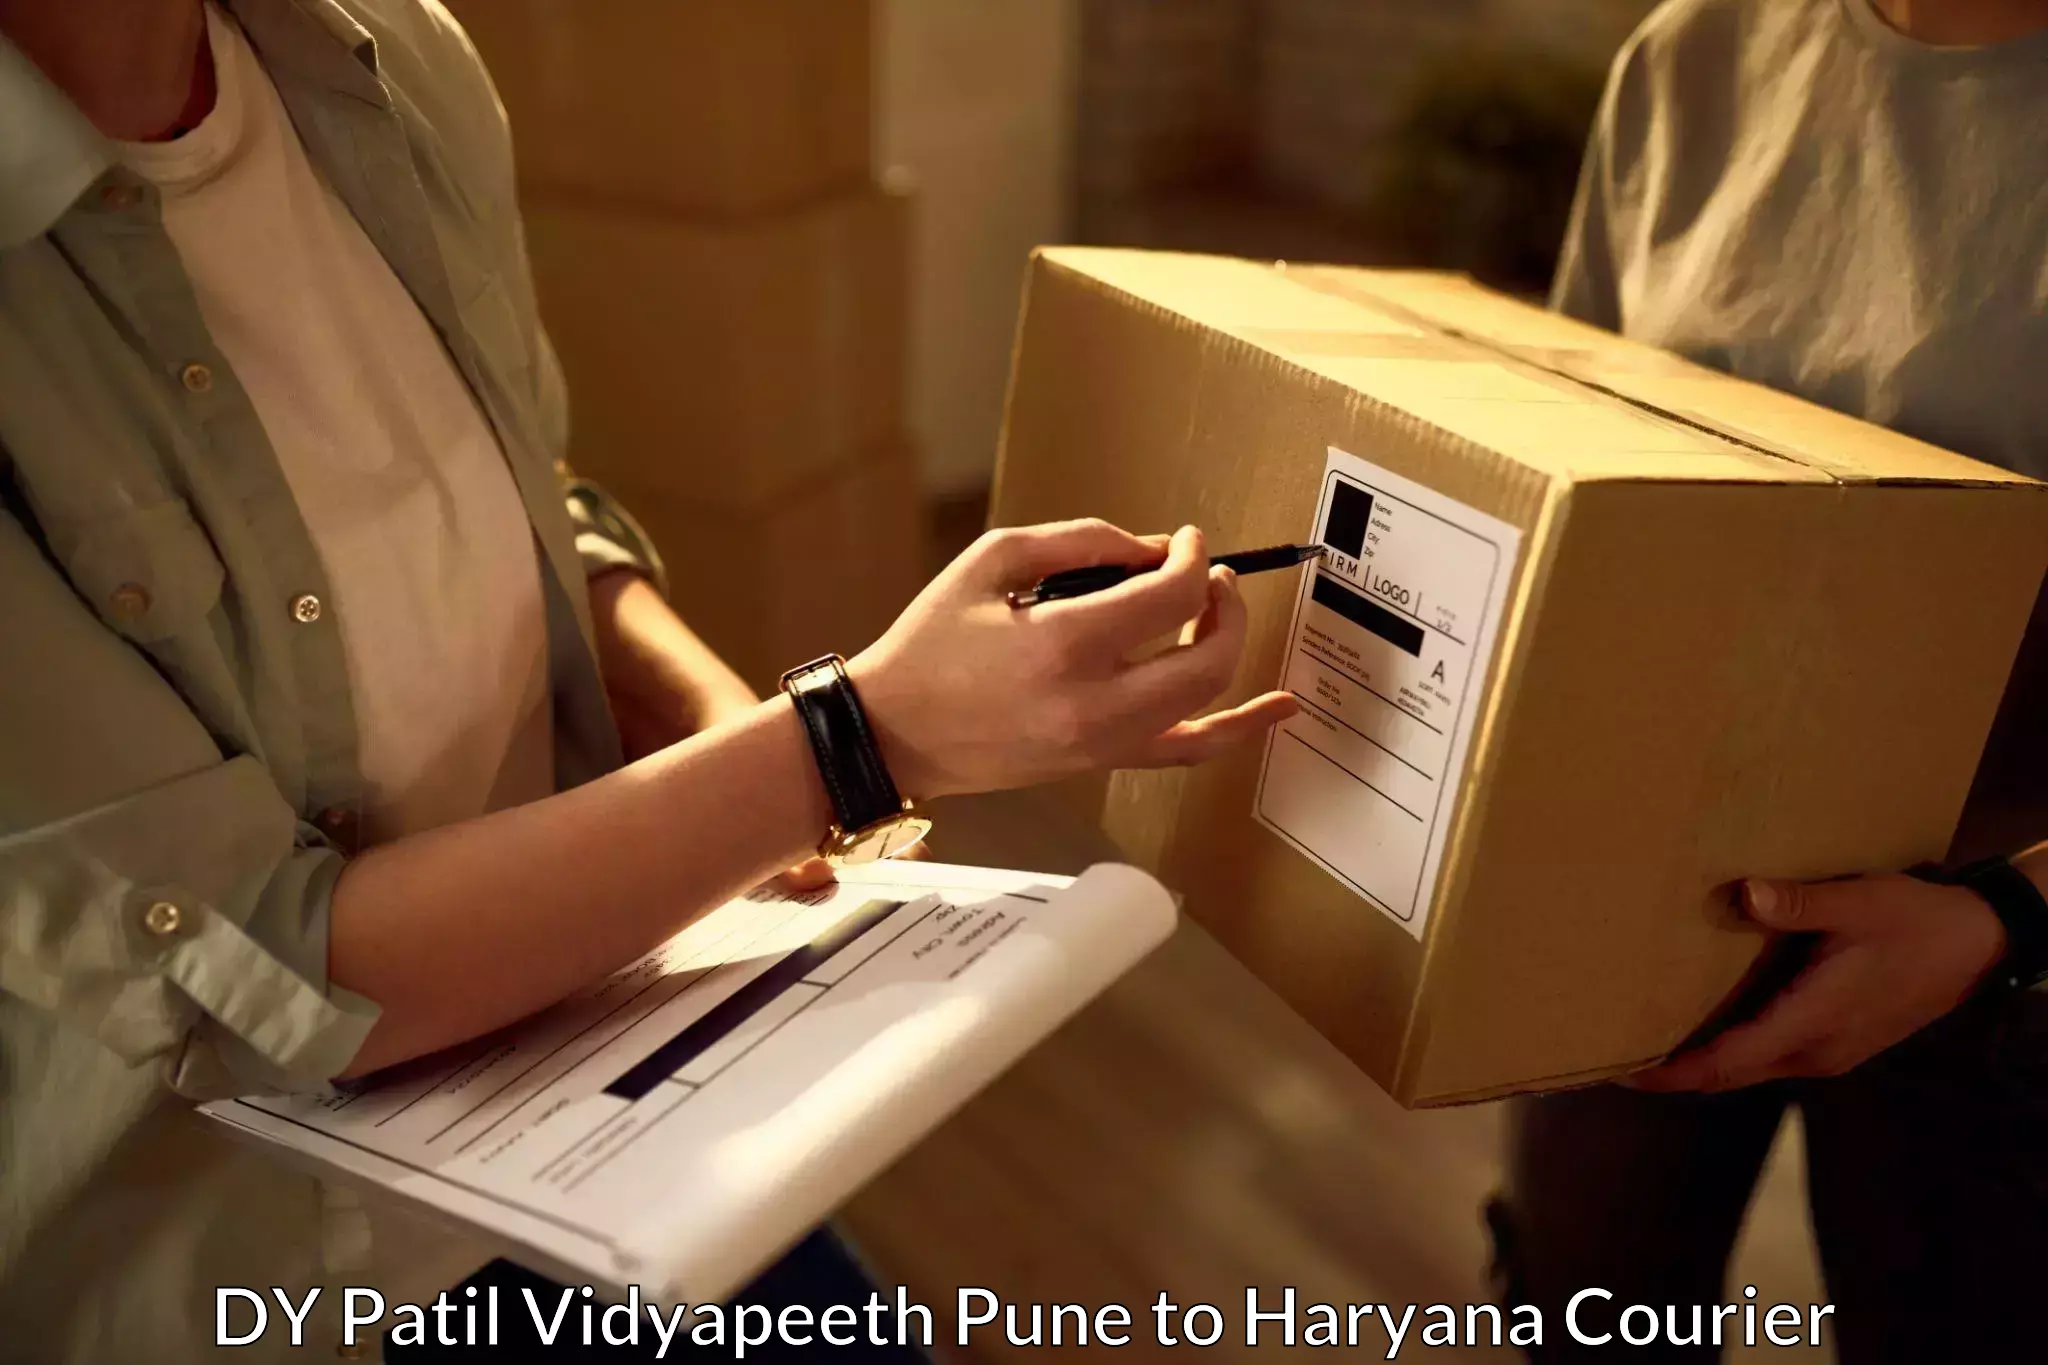 Online courier booking DY Patil Vidyapeeth Pune to Dharuhera